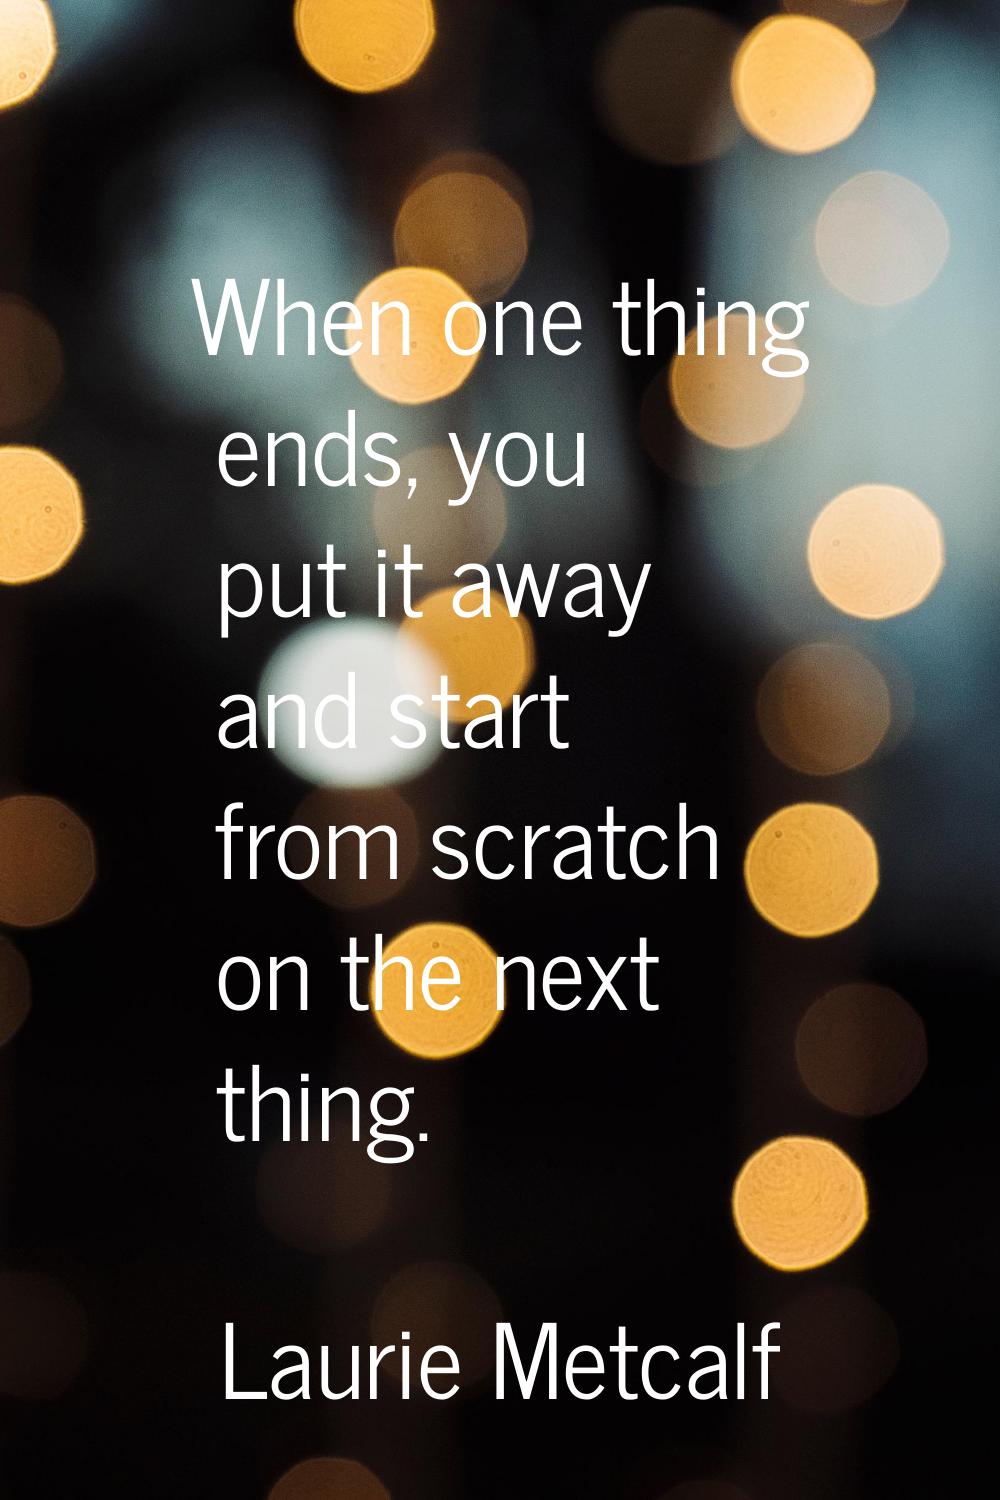 When one thing ends, you put it away and start from scratch on the next thing.